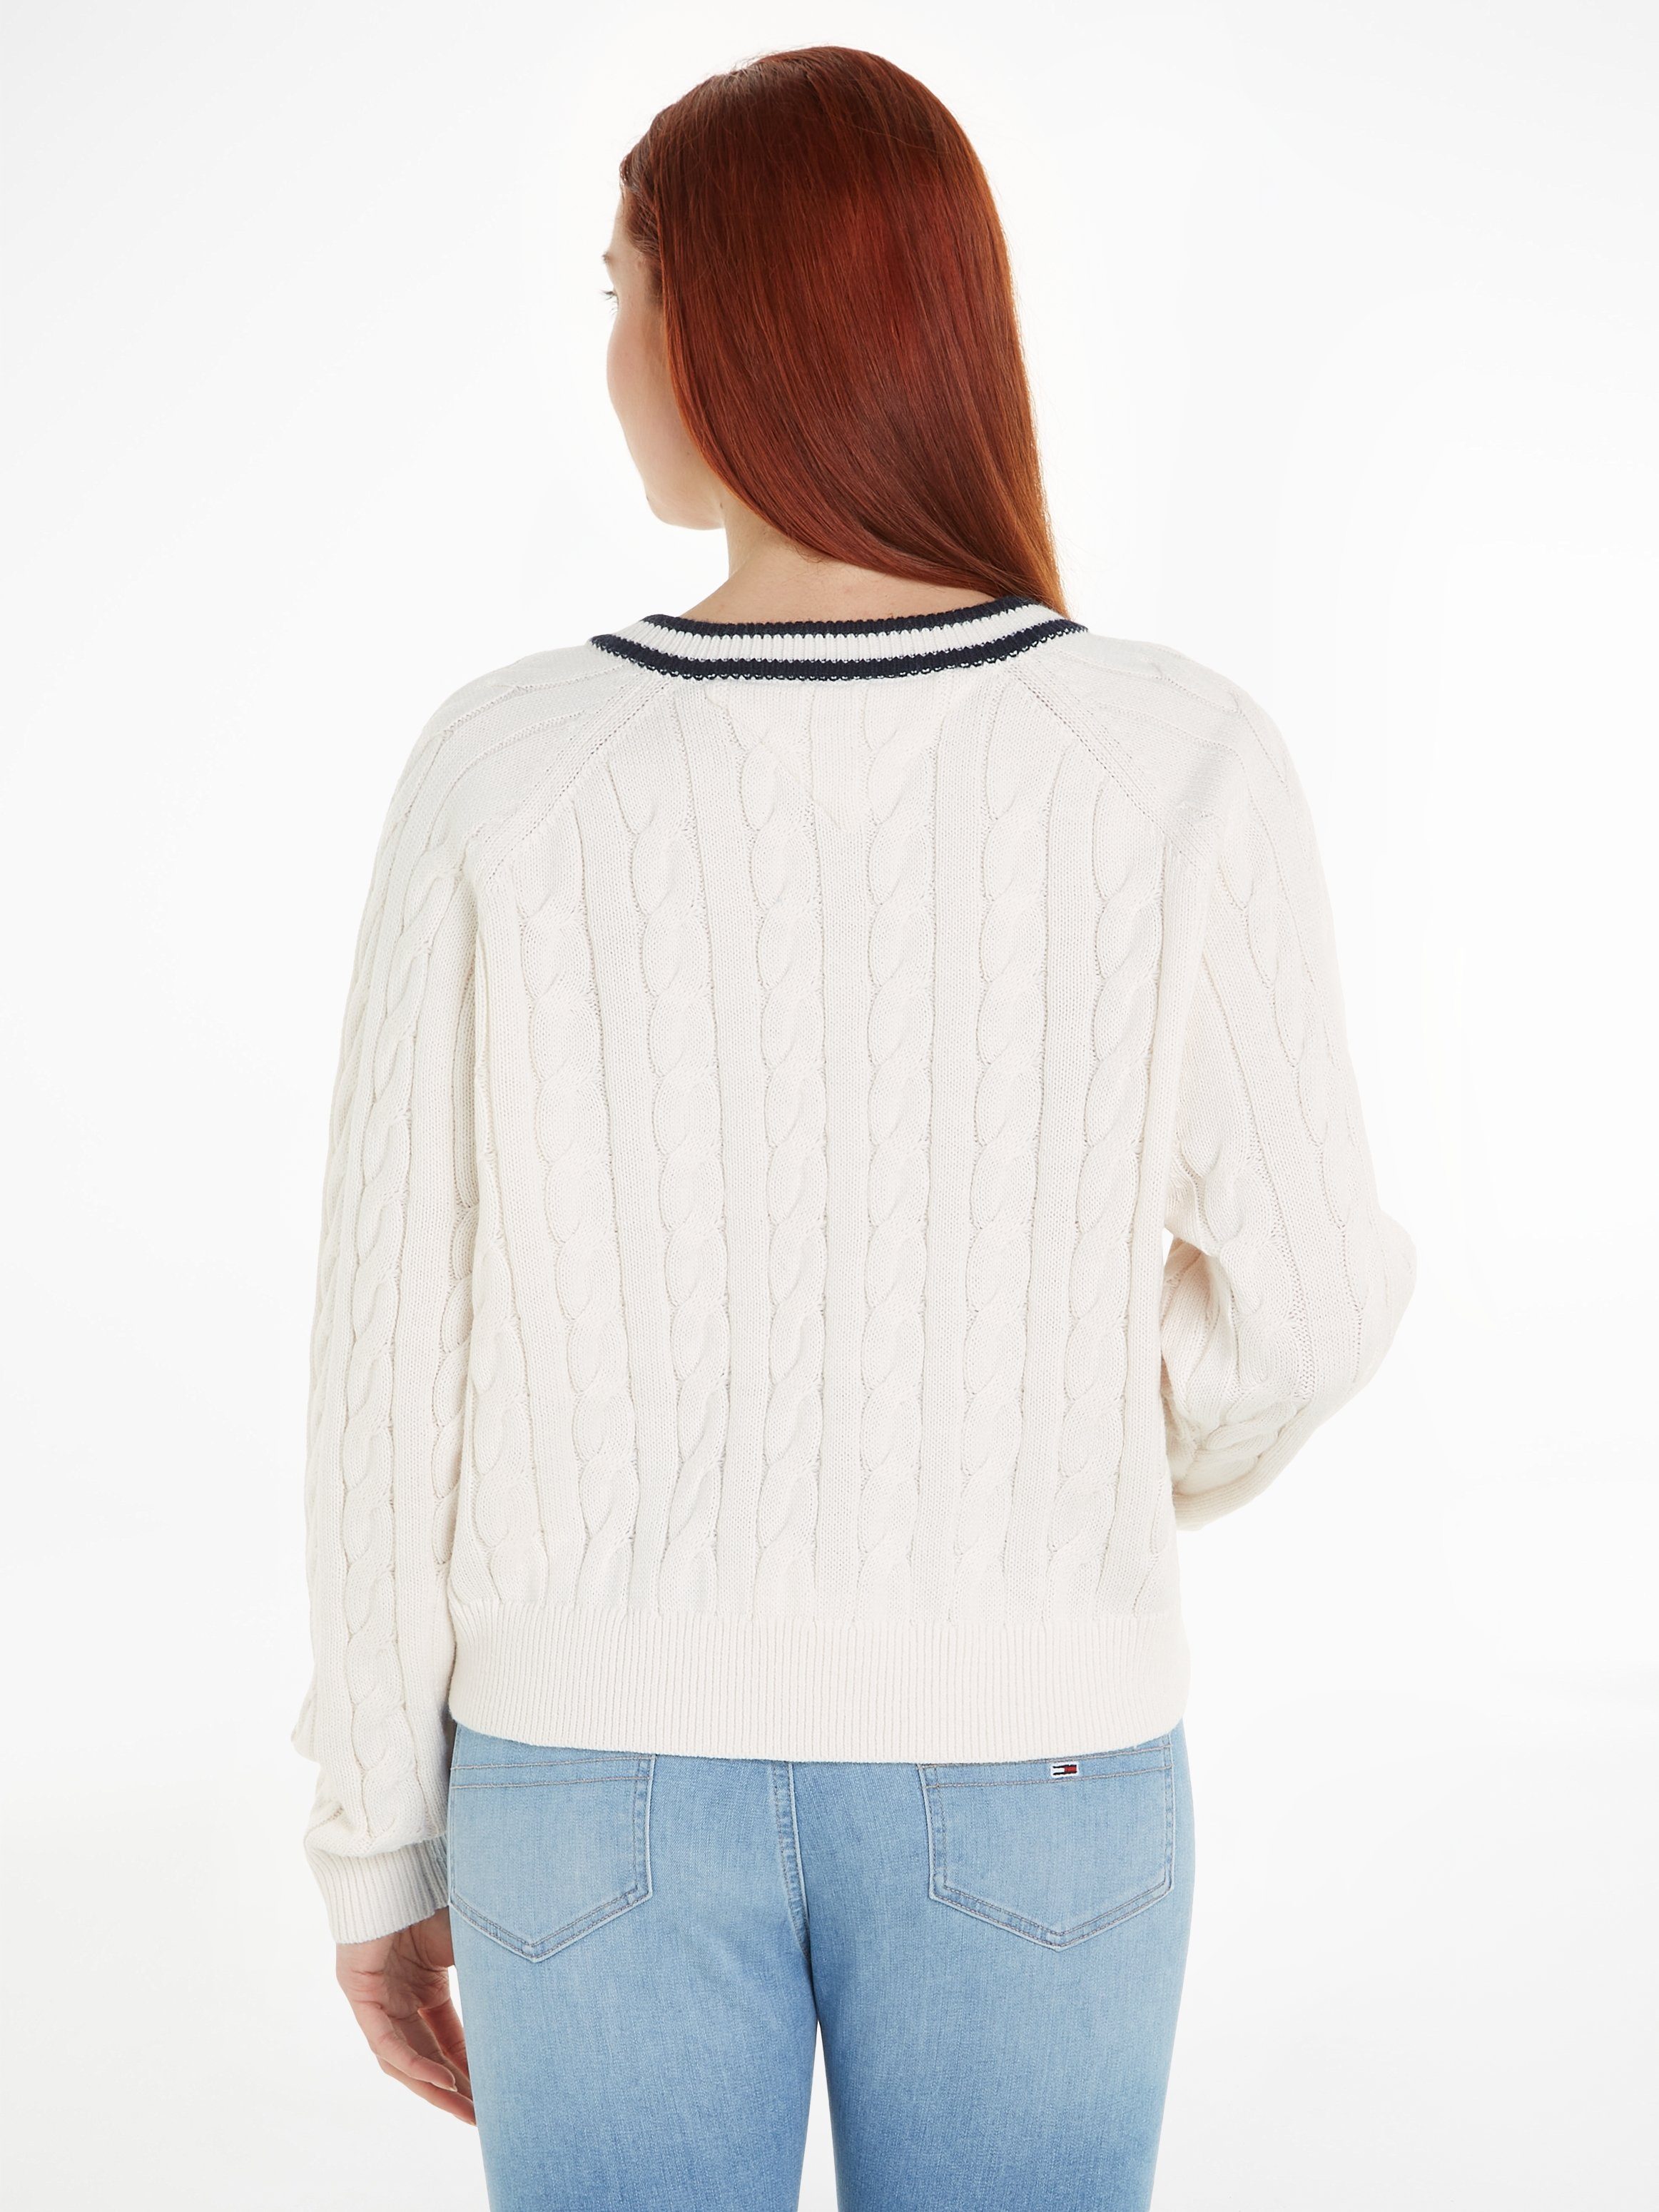 V-NECK Ancient_White SWEATER Logostickerei Jeans Tommy TJW CABLE mit V-Ausschnitt-Pullover